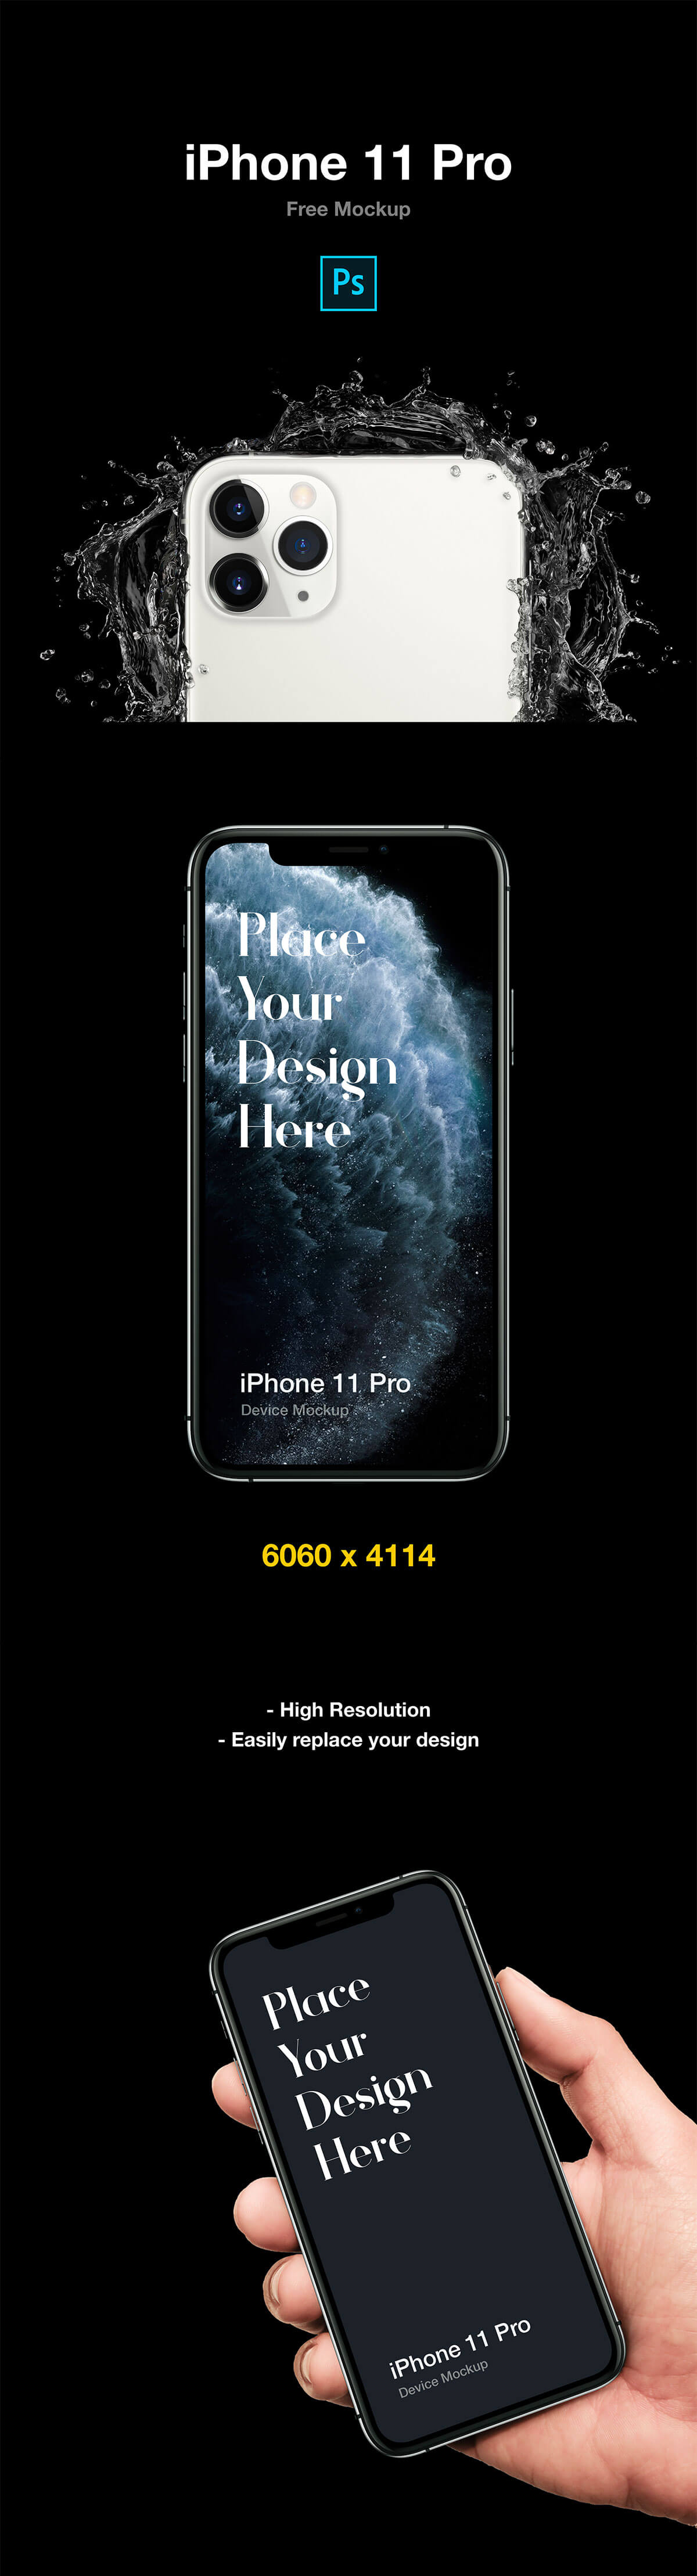 Free iPhone 11 Pro PSD Mockup Pack